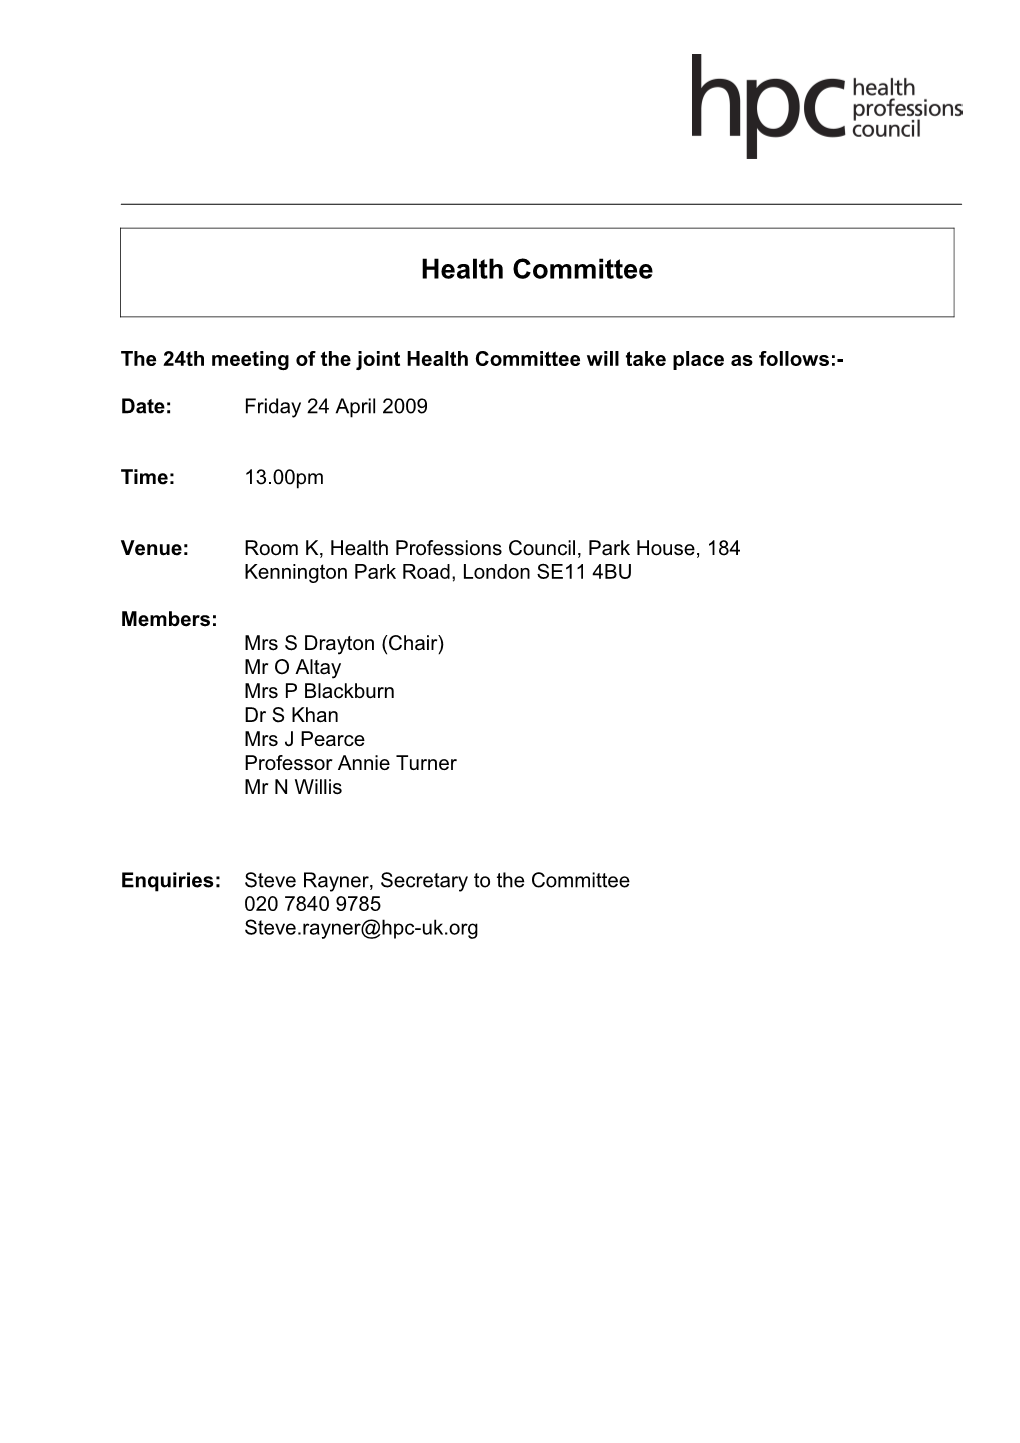 The 24Th Meeting of the Joint Health Committee Will Take Place As Follows